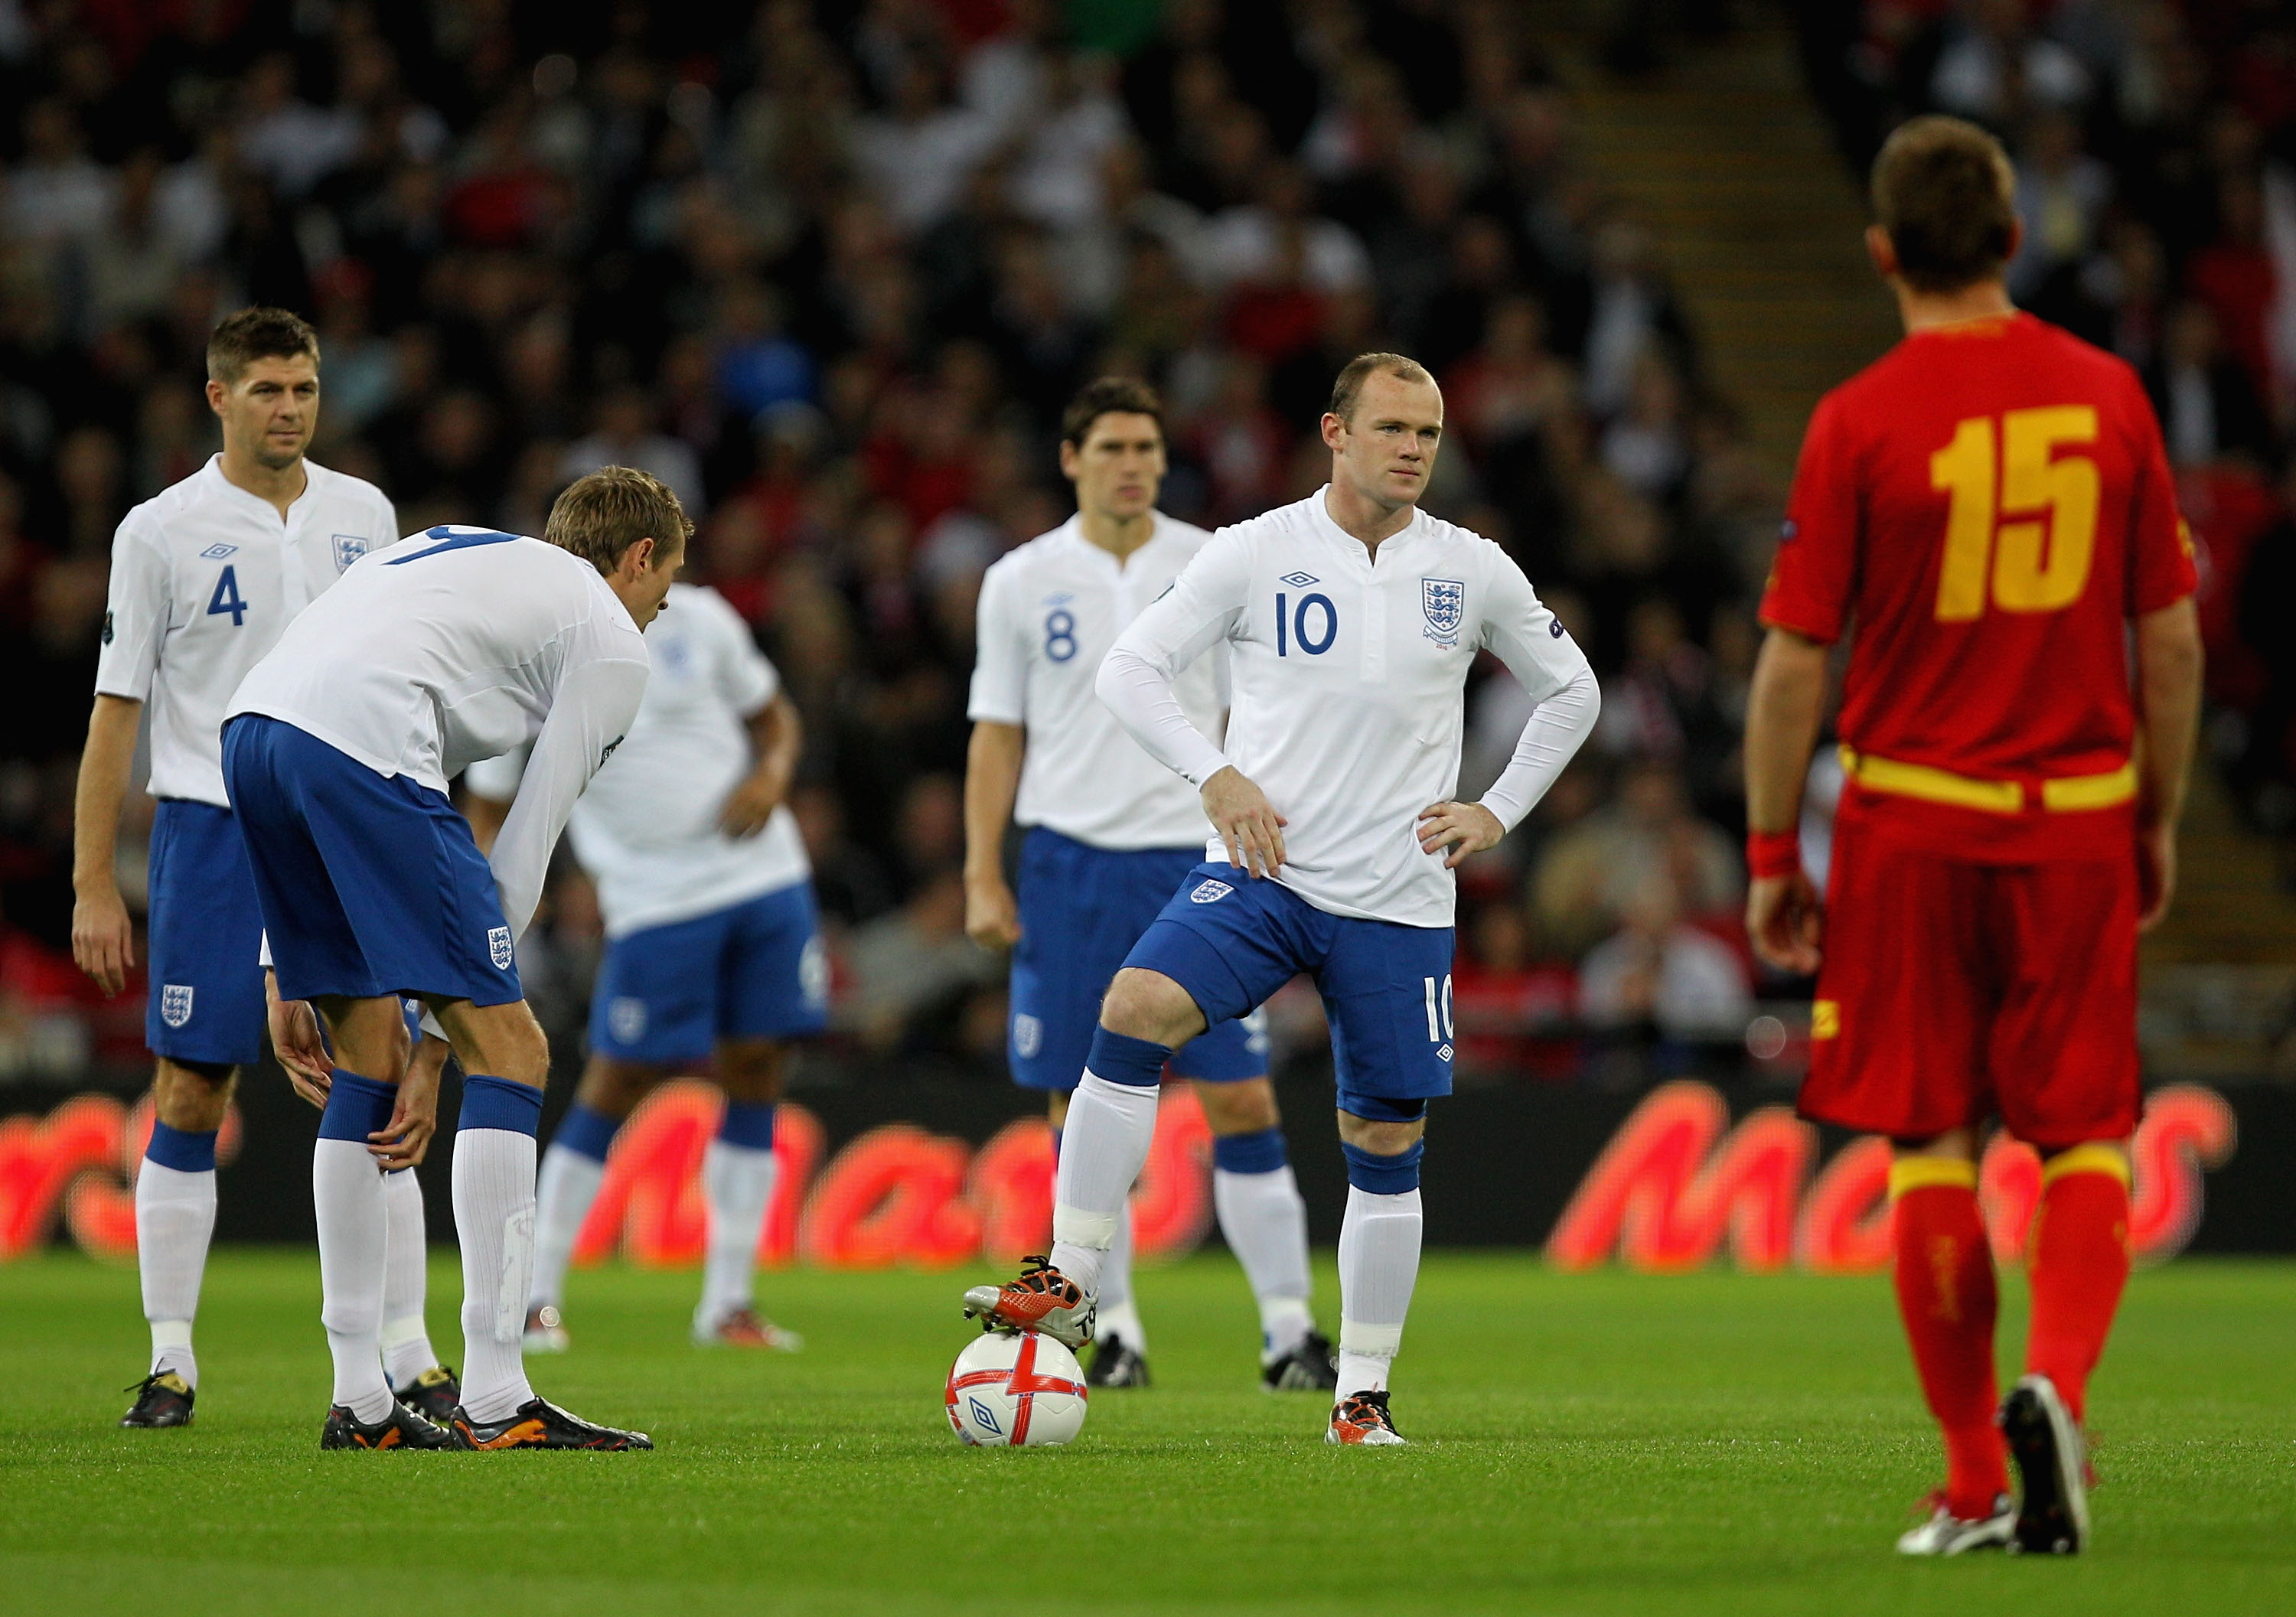 LONDON, ENGLAND - OCTOBER 12:  Wayne Rooney of England looks dejected during the UEFA EURO 2012 Group G Qualifying match between England and Montenegro at Wembley Stadium on October 12, 2010 in London, England.  (Photo by Hamish Blair/Getty Images)